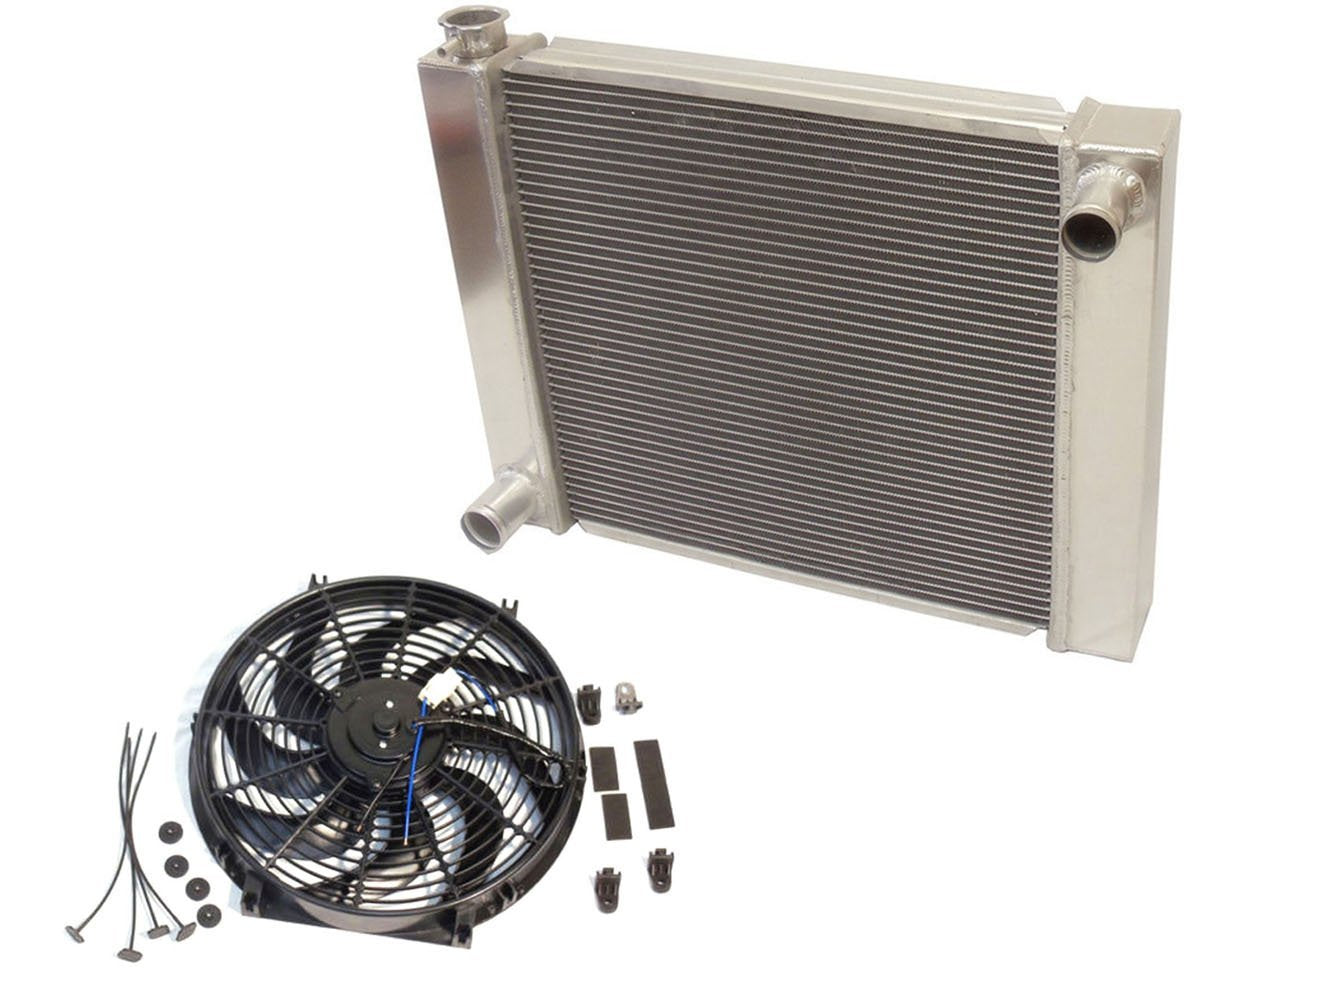 Universal Super Cool Ford/Mopar Fabricated Aluminum Radiator 24" x19" x3" With 14 Inch Electric Fan